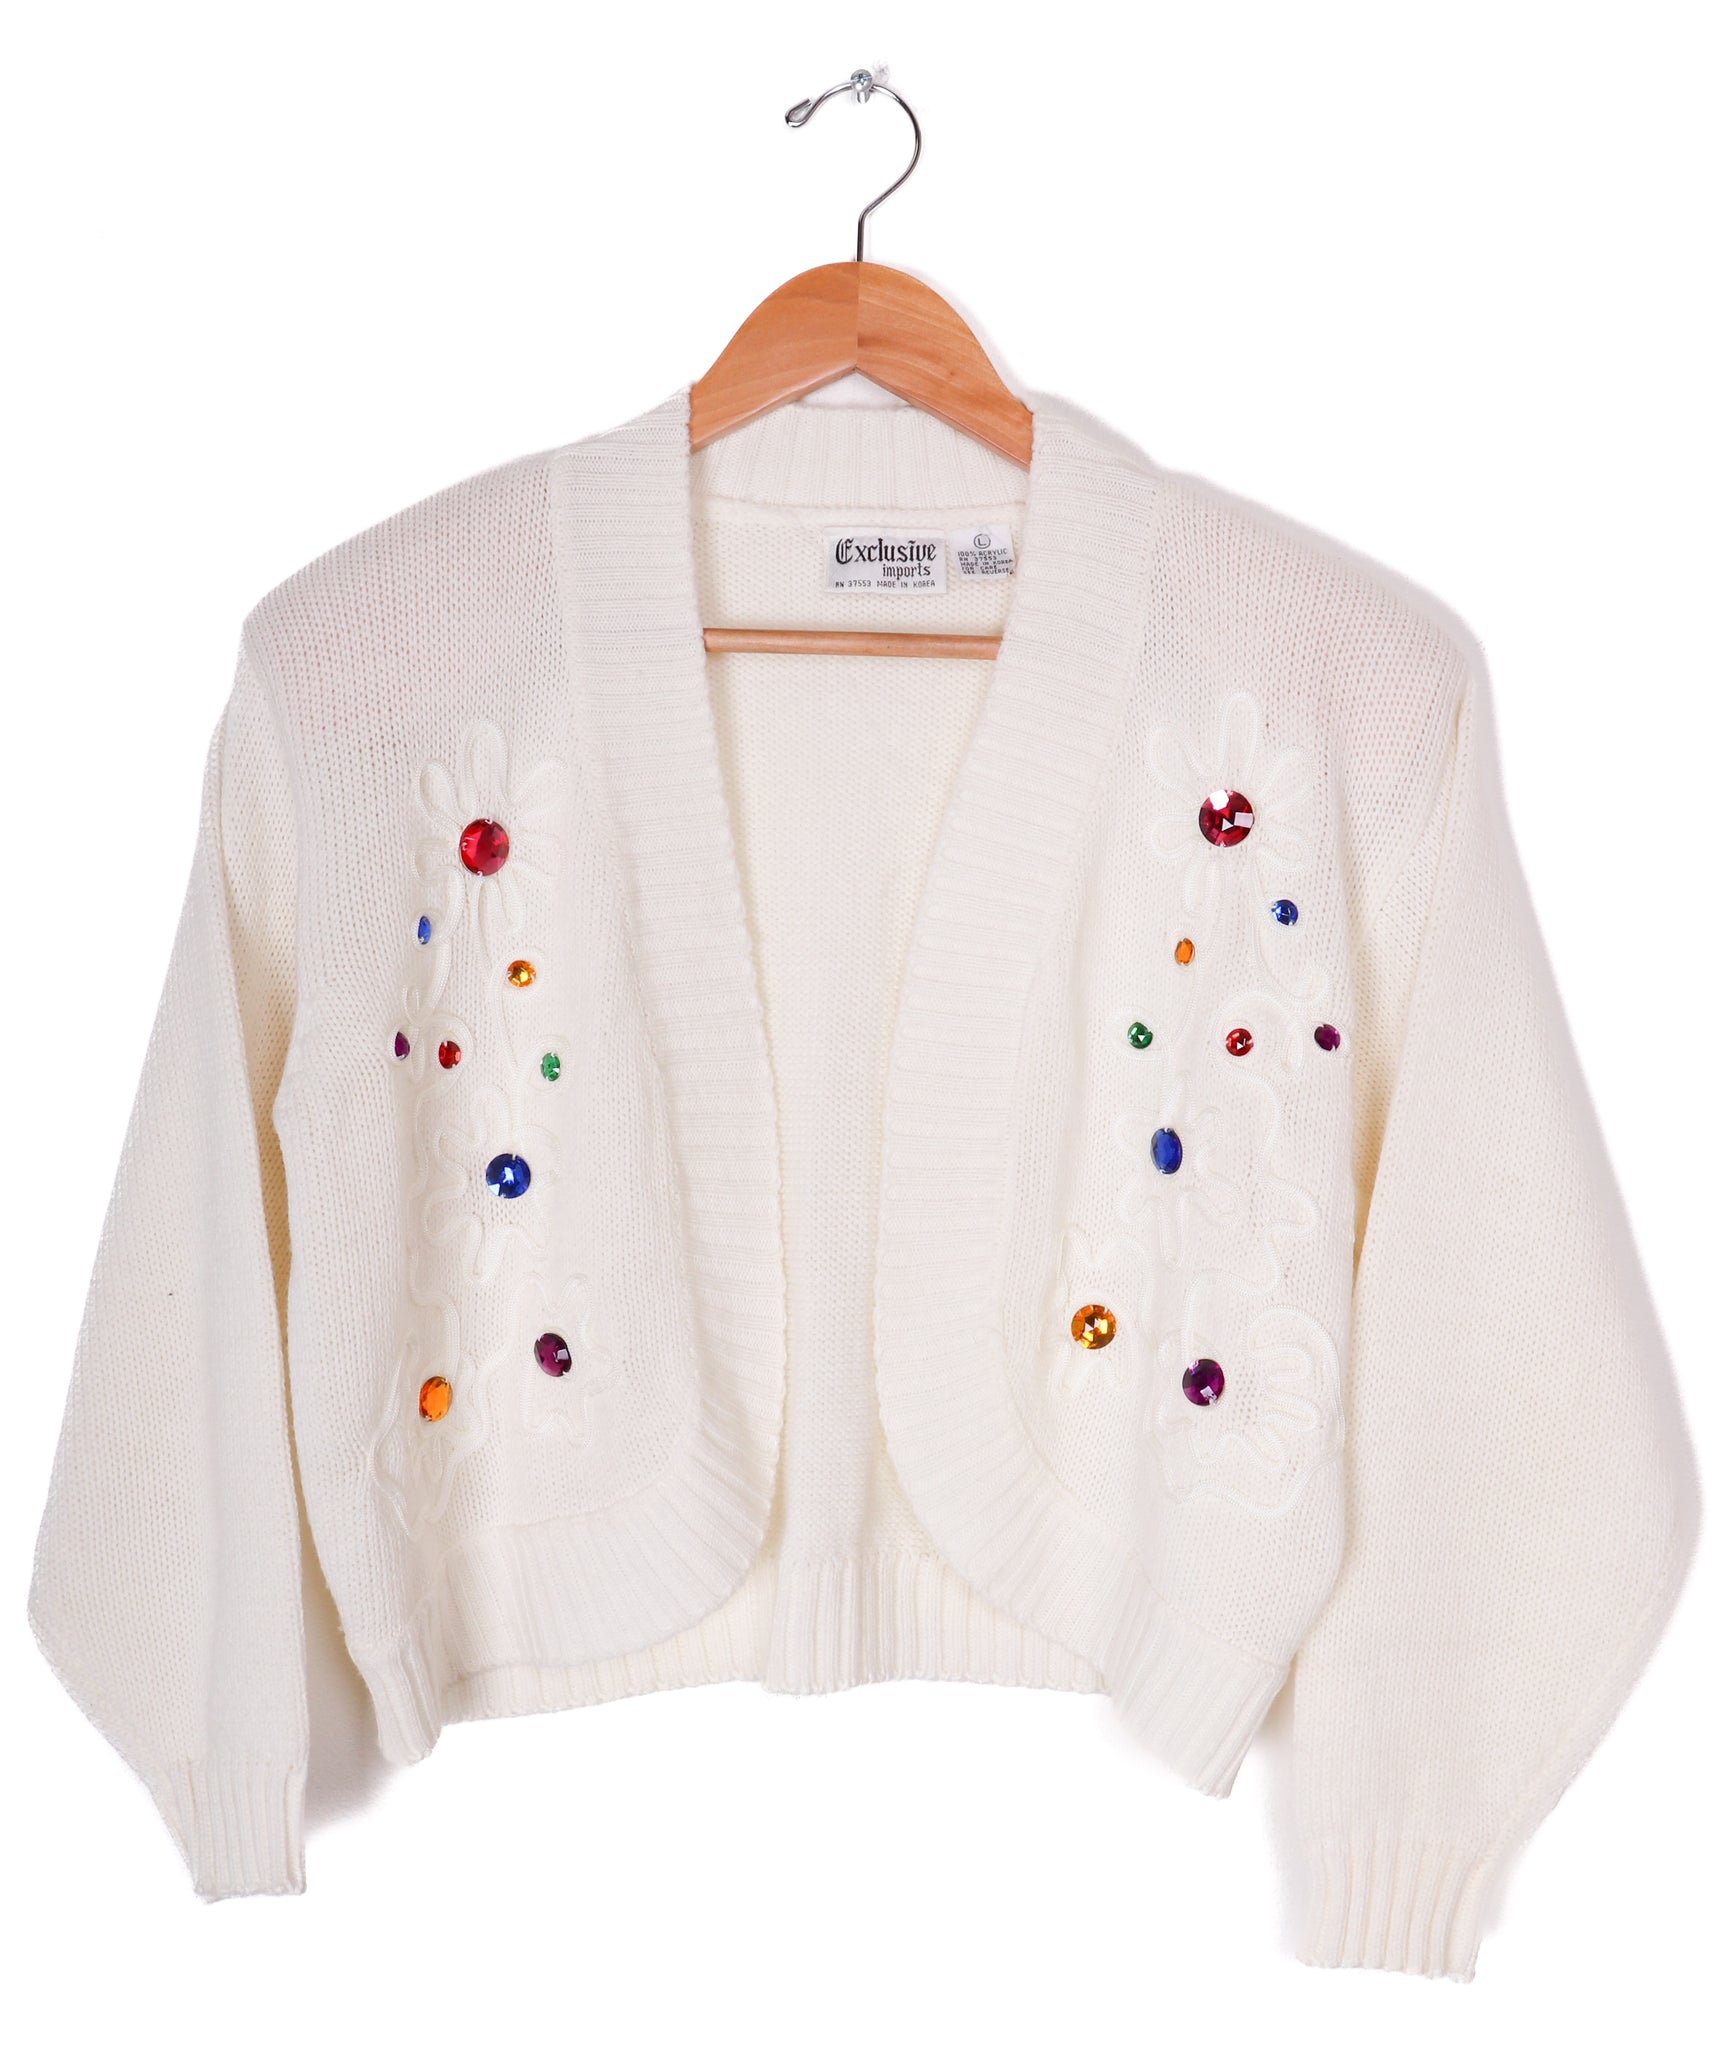 90s Exclusive Imports White Bejeweled Cropped Sweater Cardigan